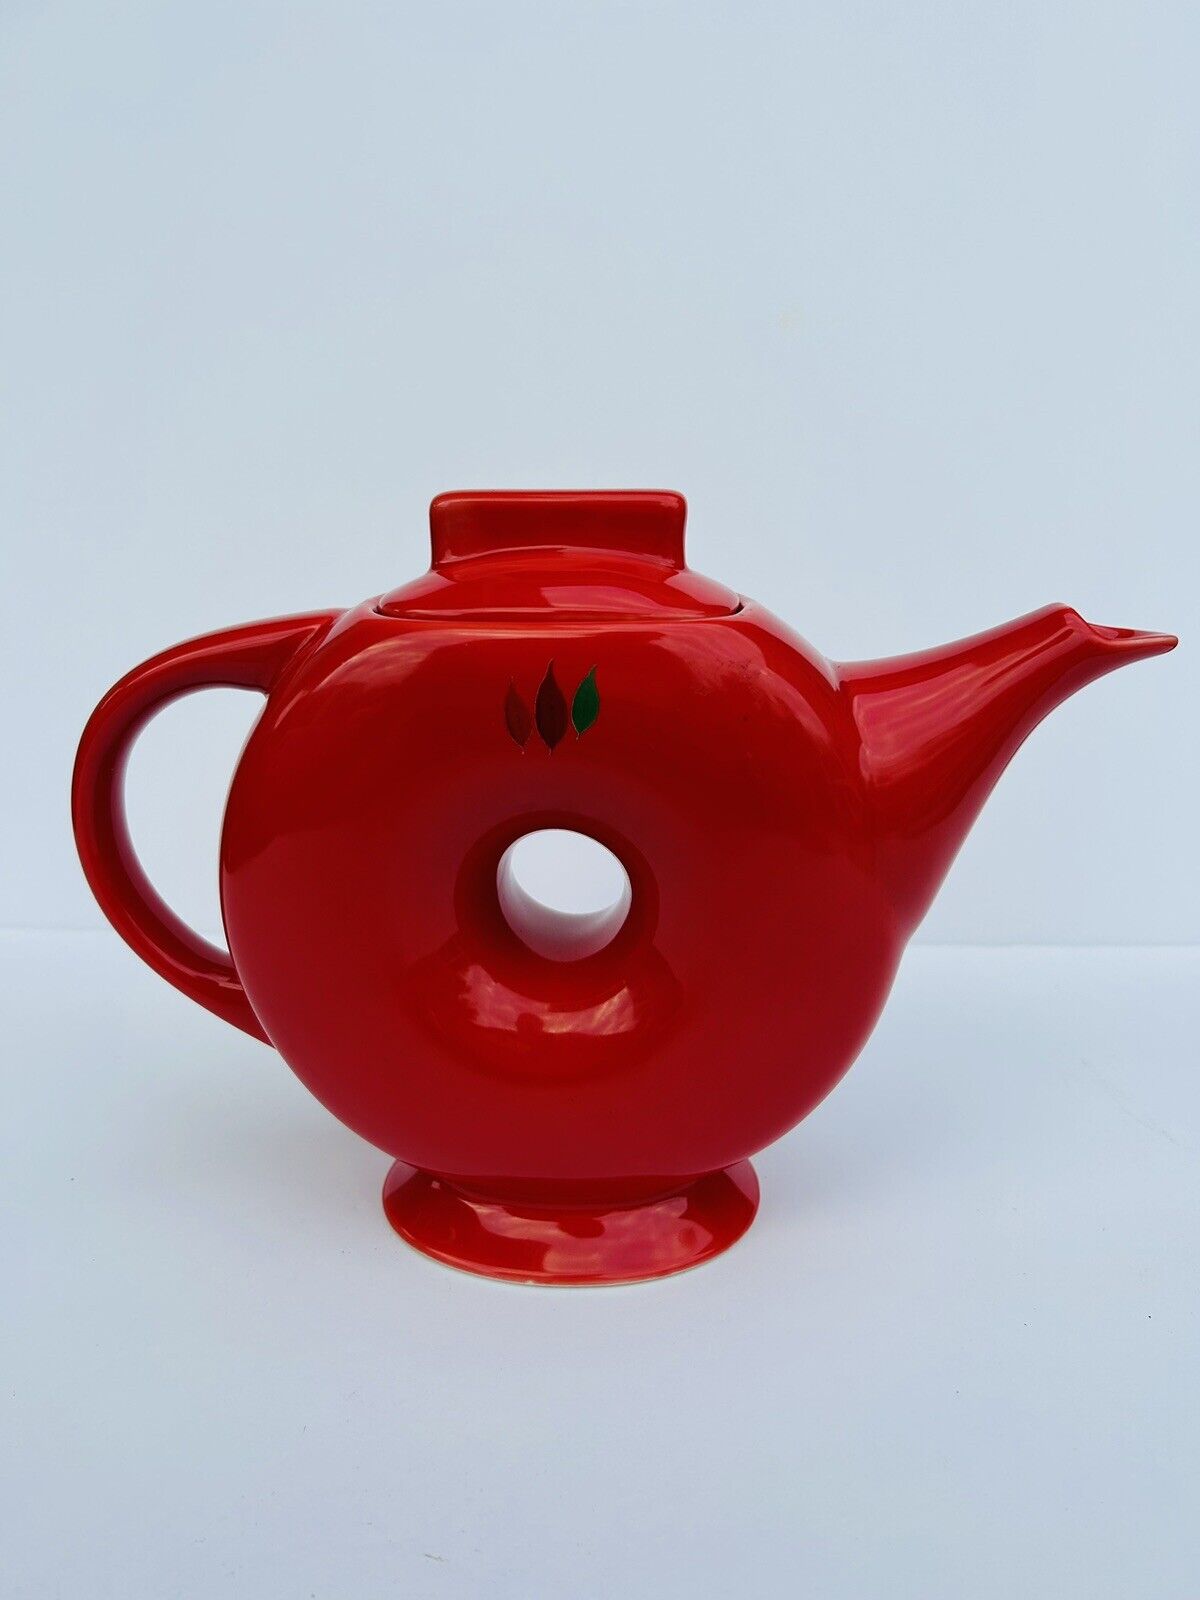 Vintage Art Deco Donut Teapot - Chinese Red-Capacity 6 cups